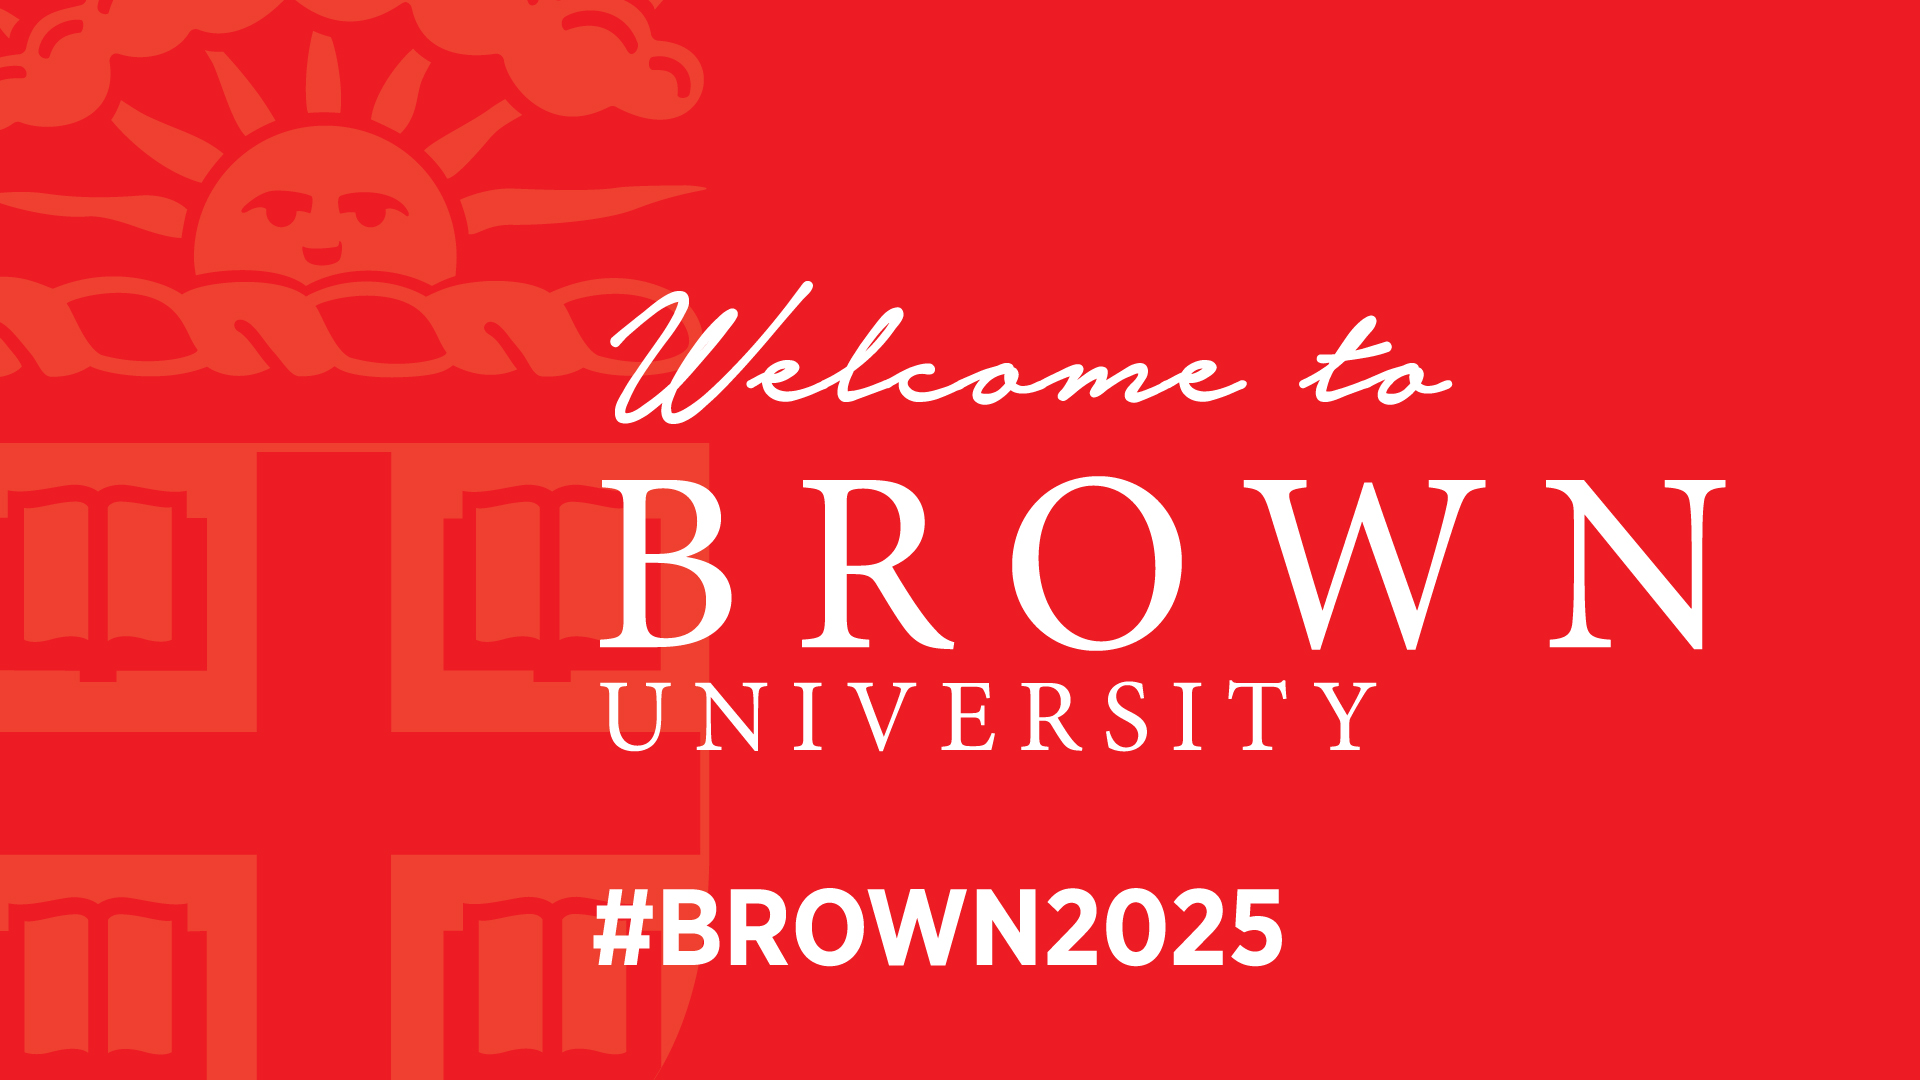 Red rectangle that includes text welcoming the Class of 2025 to Brown